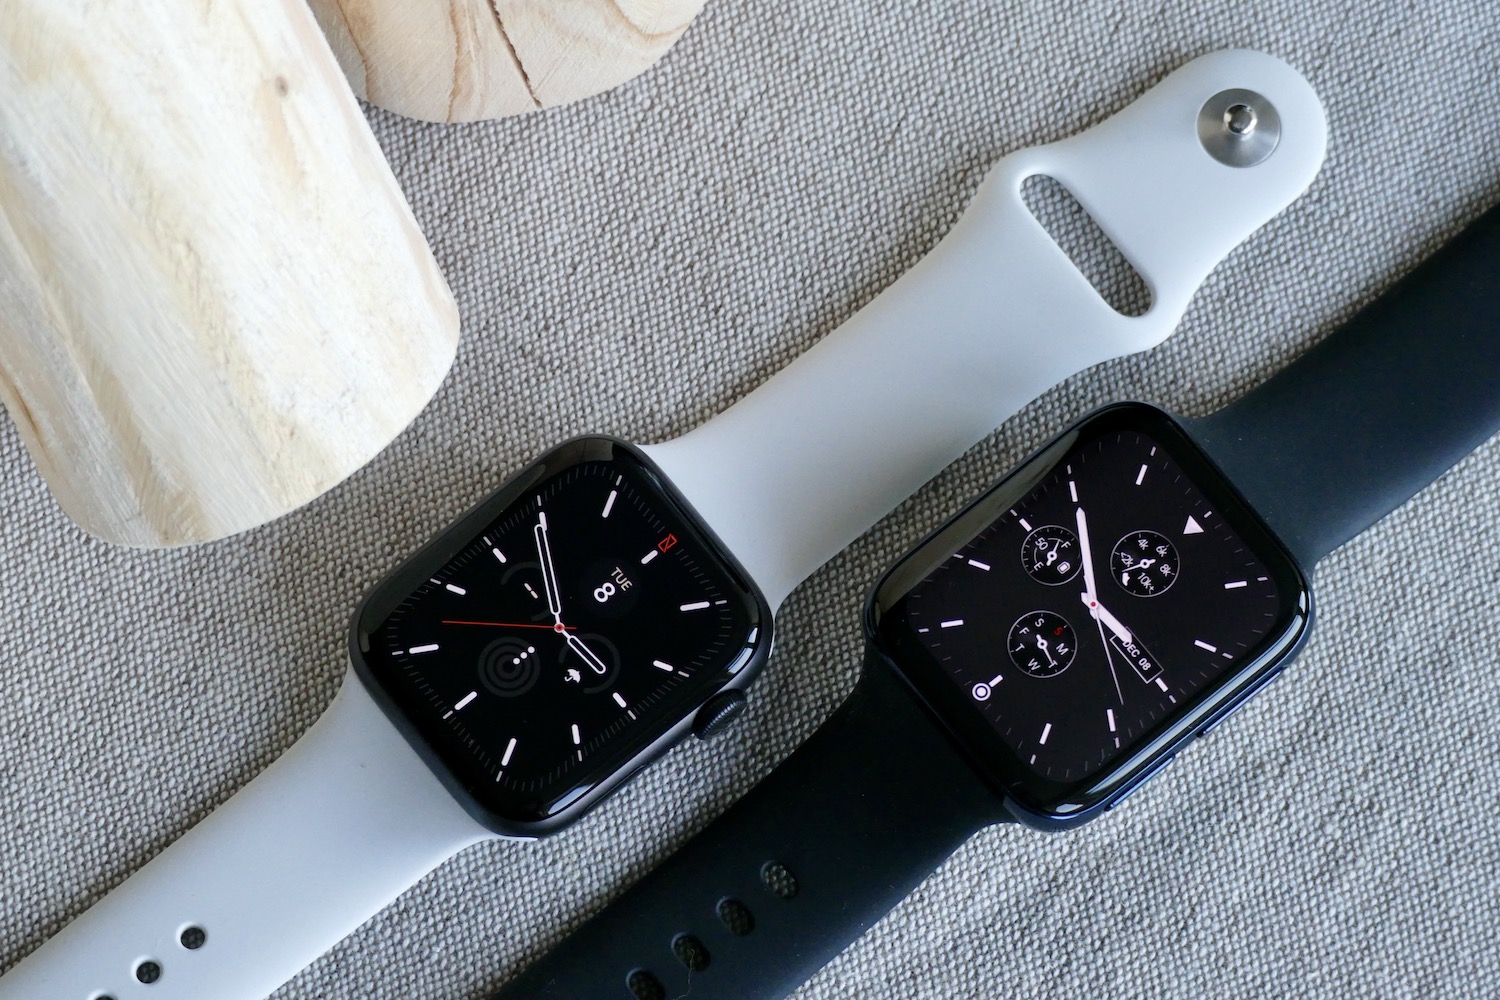 The Oppo Watch isn't bad, but it does look like an Apple Watch